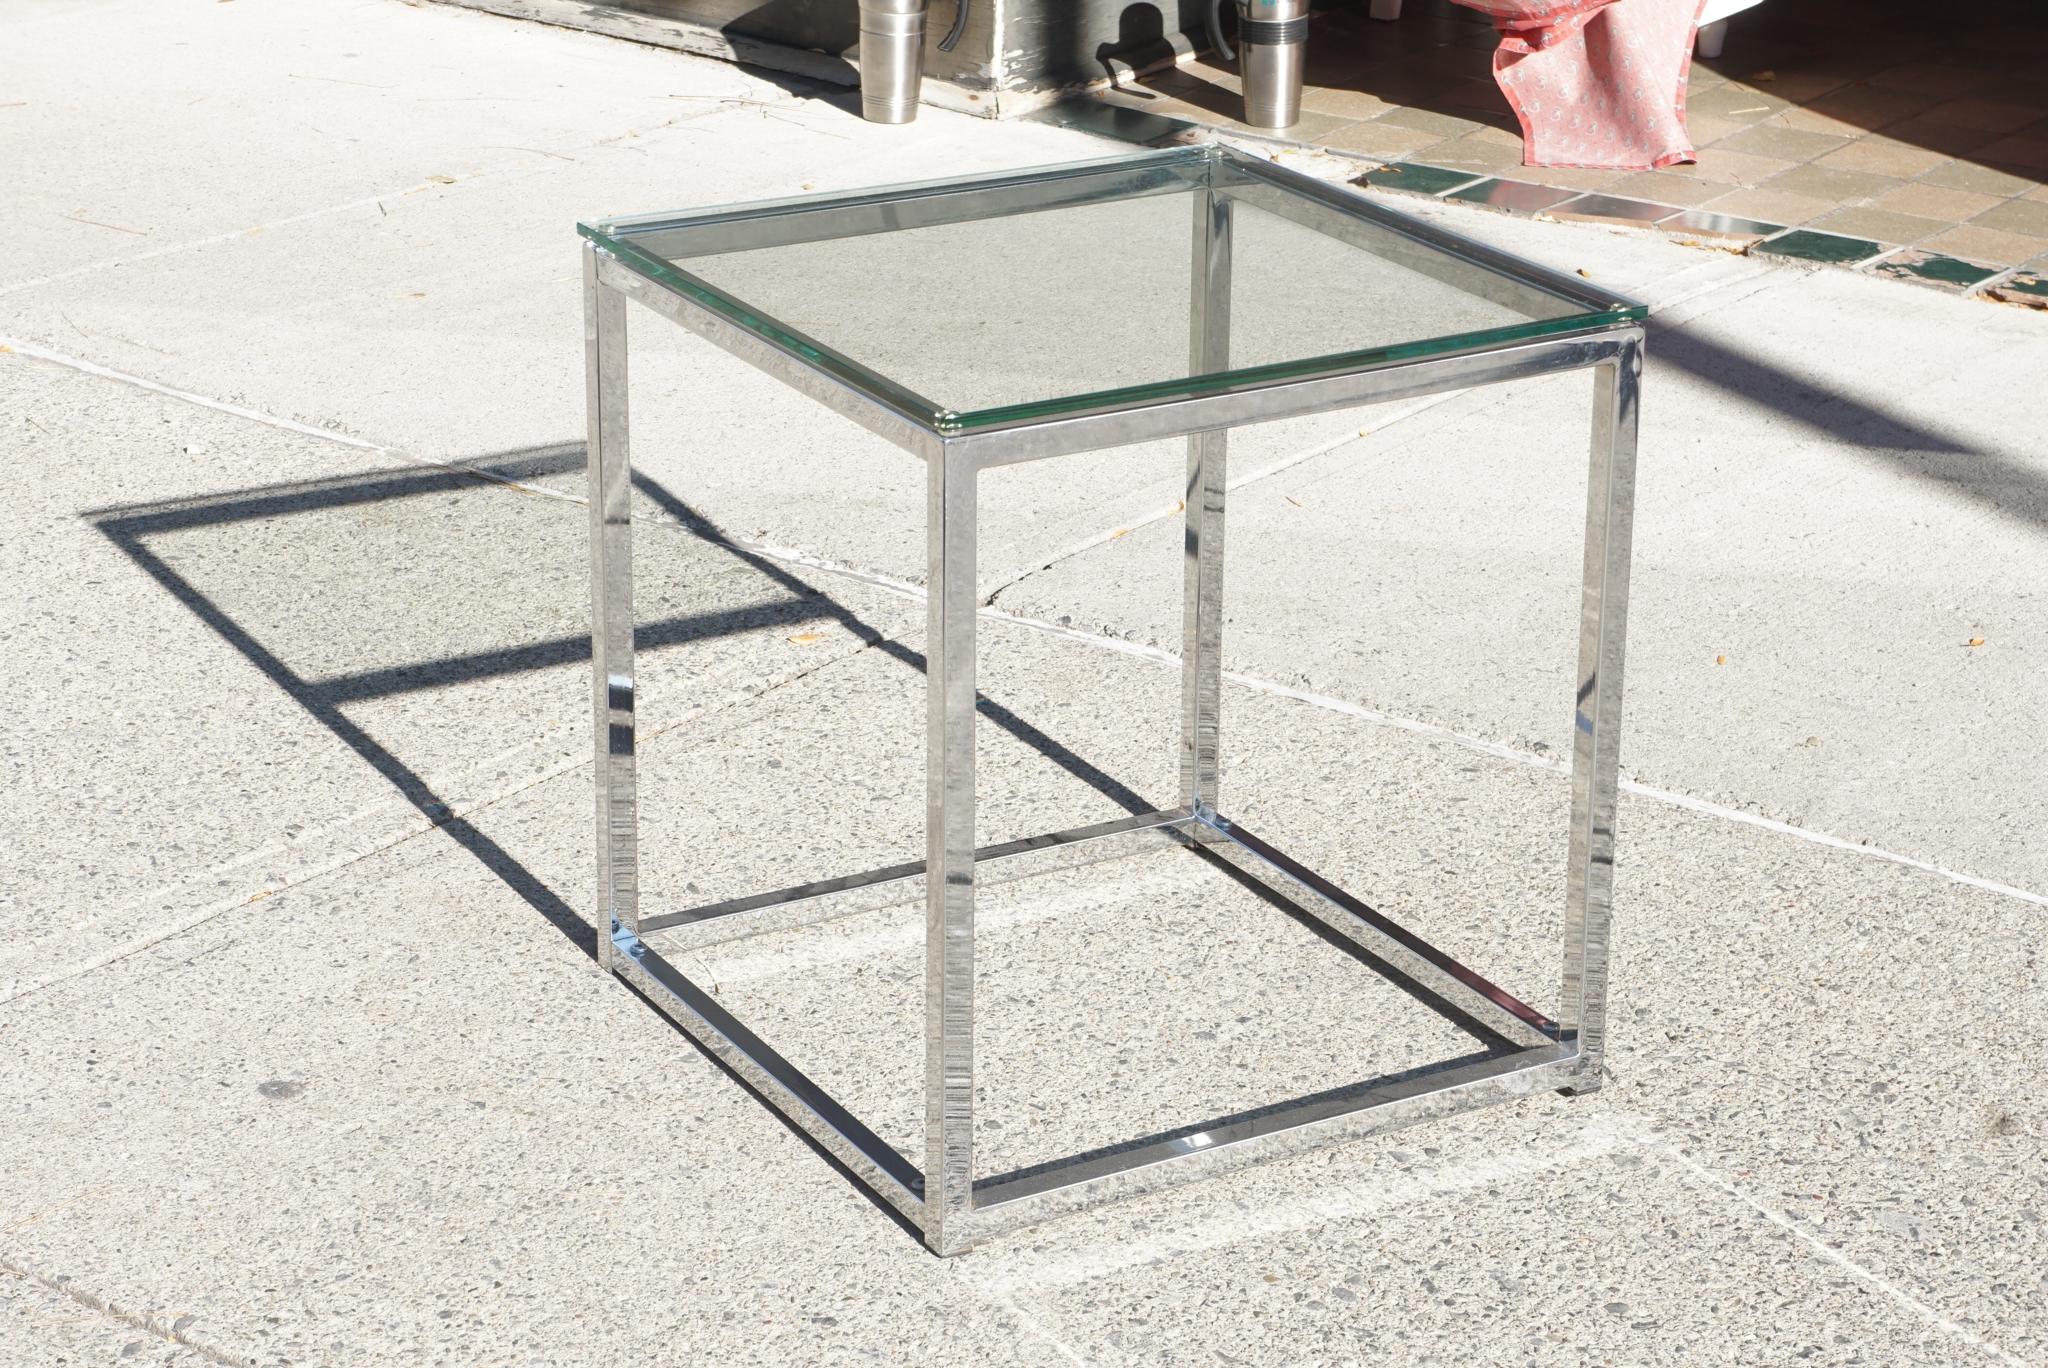 Made in the 70s this low cube table is a perfect accent in a modern interior. Clean and fresh without surfaced detail but long on design-savvy and clearly is the product of the international style so allied with architectural modernism.
The table